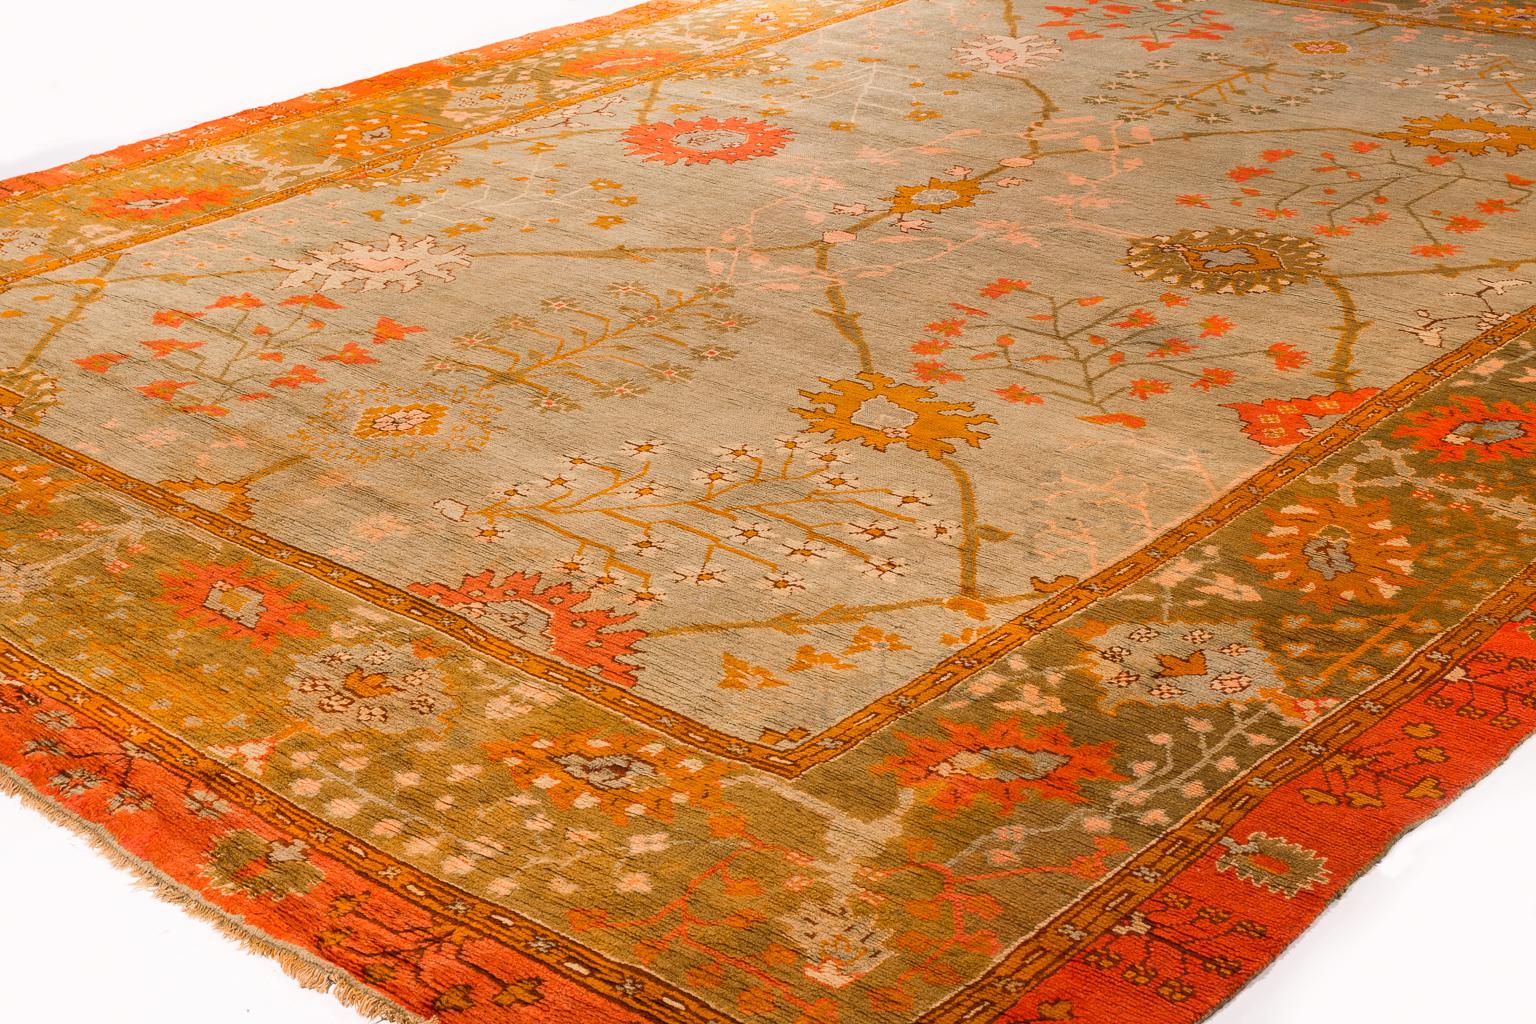 This antique Turkish Oushak (Ushak) rug represents the very best of its type. 'Oushak' refers to rugs which use a particular family of designs, called after the city Usak - one of the larger towns in Western Anatolia, which was a major centre of rug